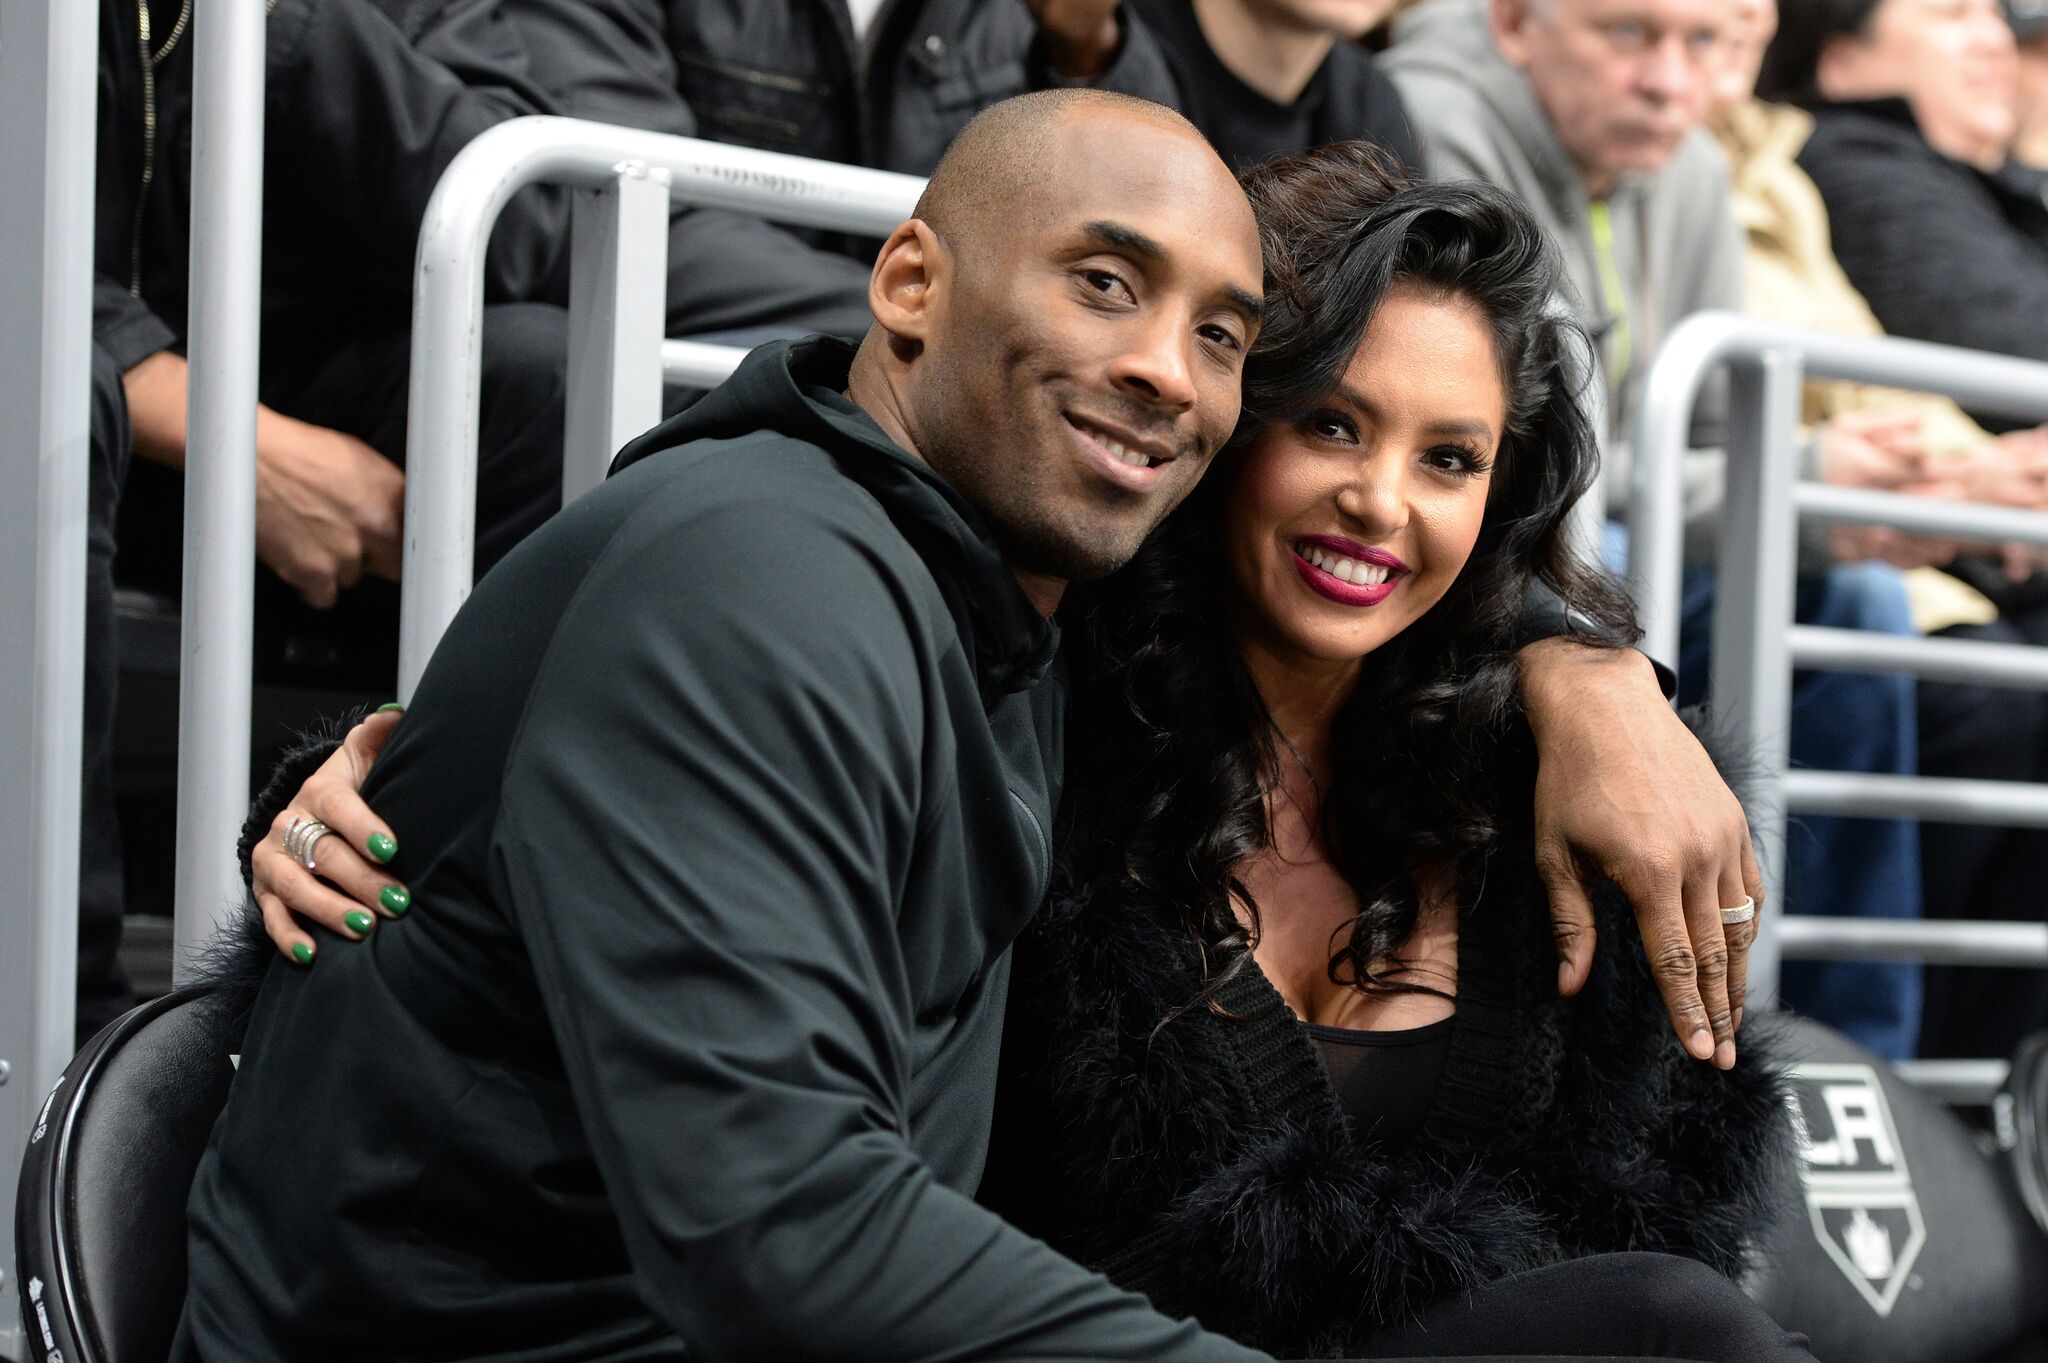 Los Angeles Lakers Guard Kobe Bryant and his wife Vanessa Bryant pose for a photo during a game between the Los Angeles Kings and the Washington Capitals at STAPLES Center  | Getty Images